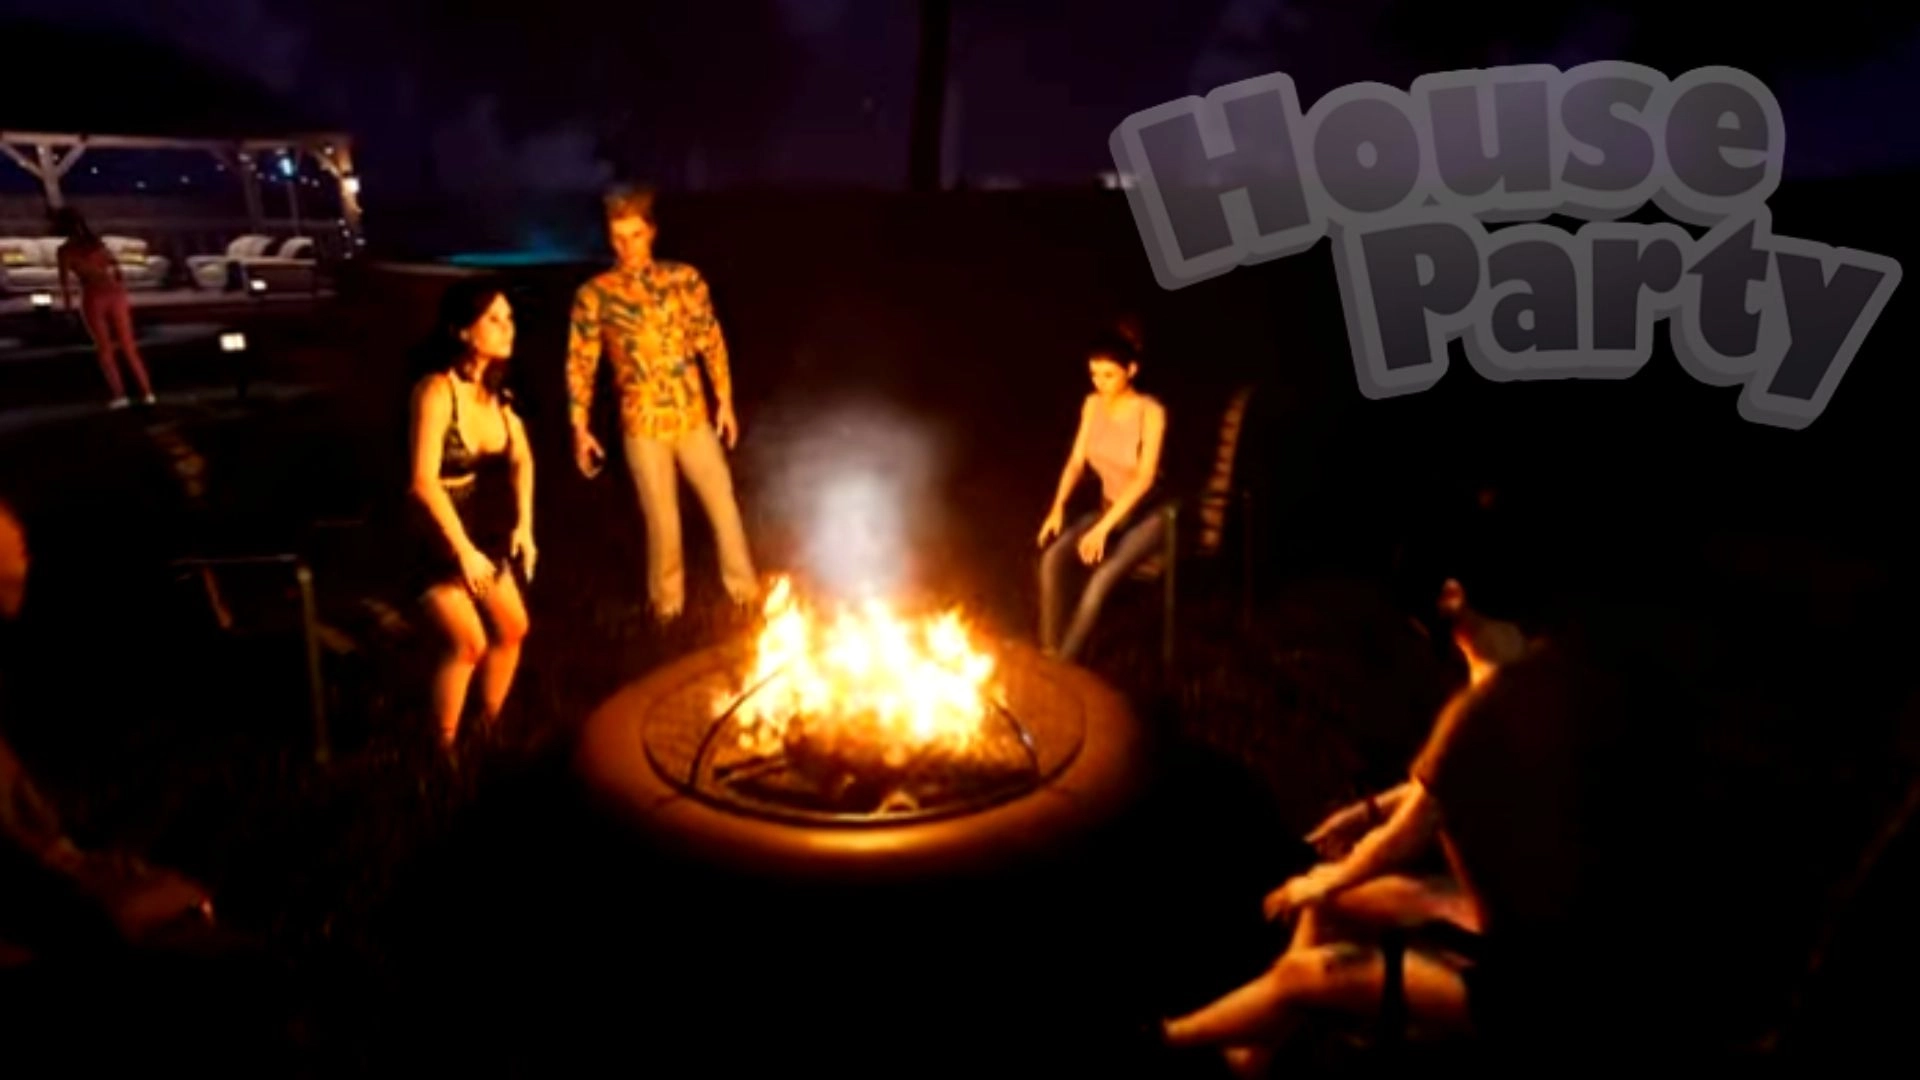 House Party Video Game Parents Guide and Age Rating (2022)